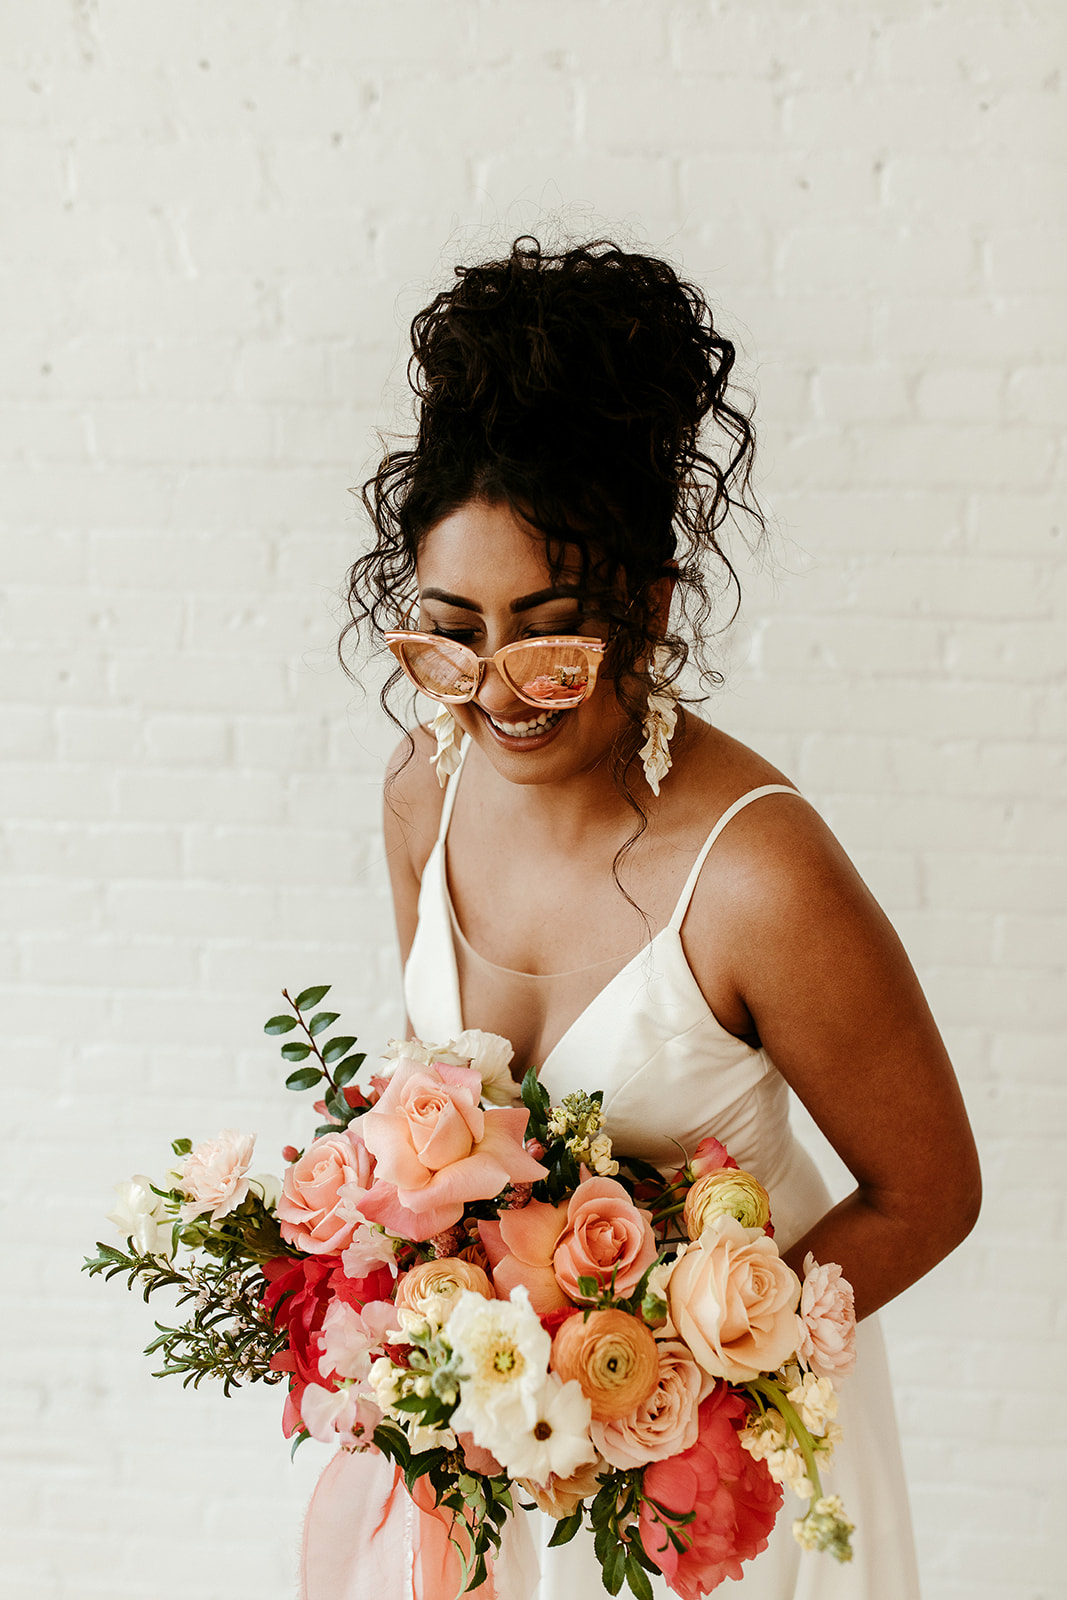 Boho Bridal Style with a bold updo, sunglasses and florals with a citrus palette